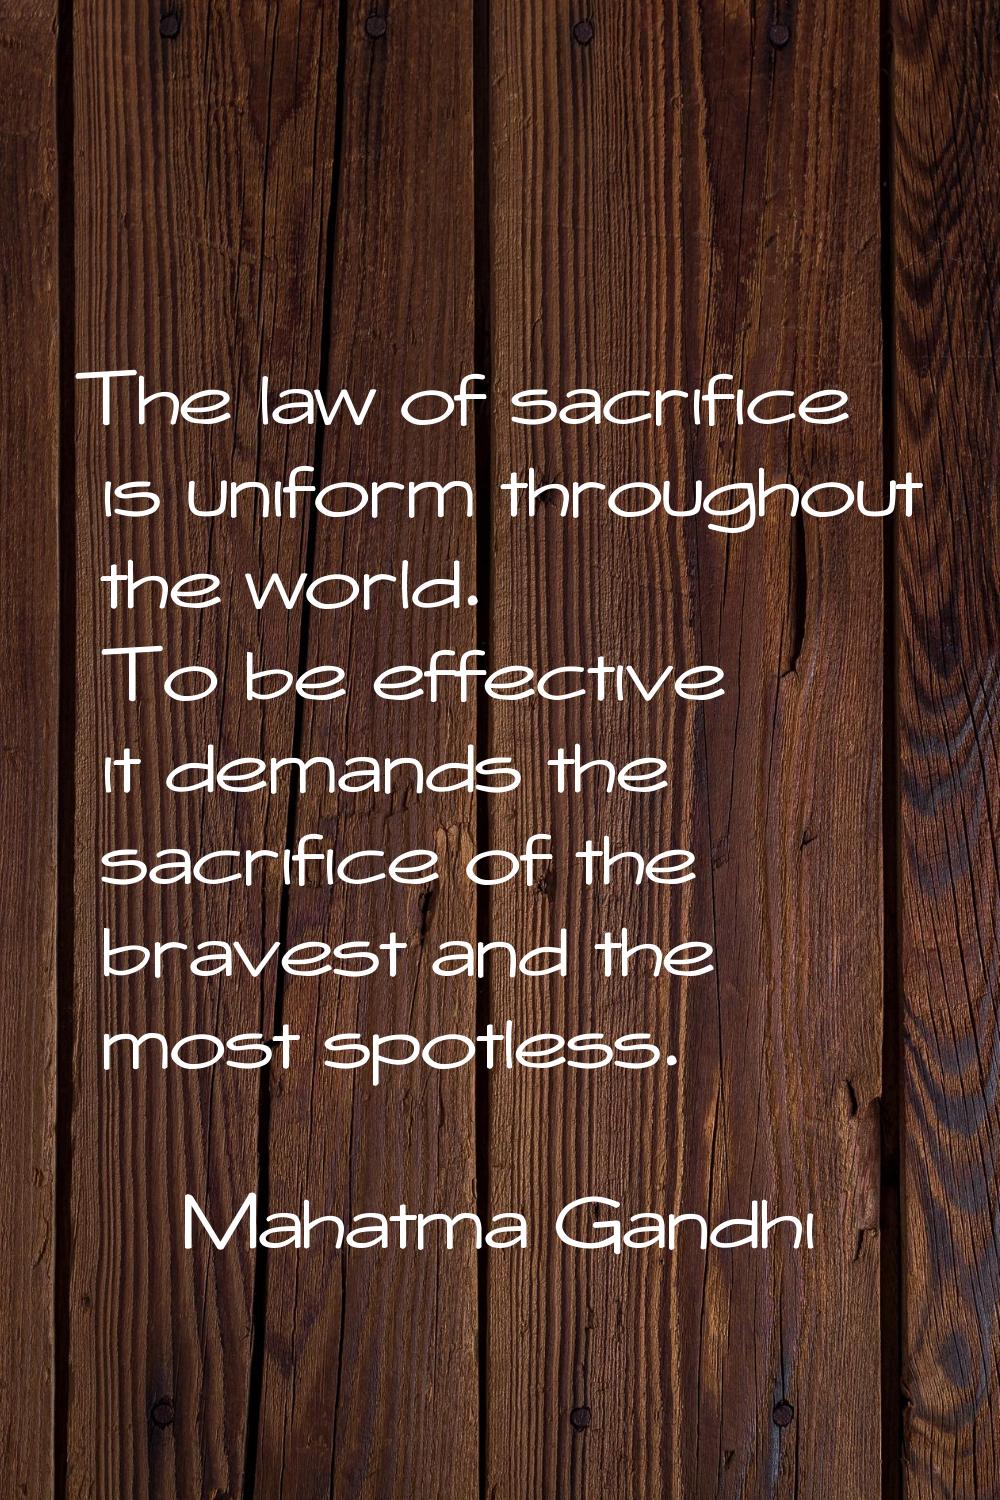 The law of sacrifice is uniform throughout the world. To be effective it demands the sacrifice of t